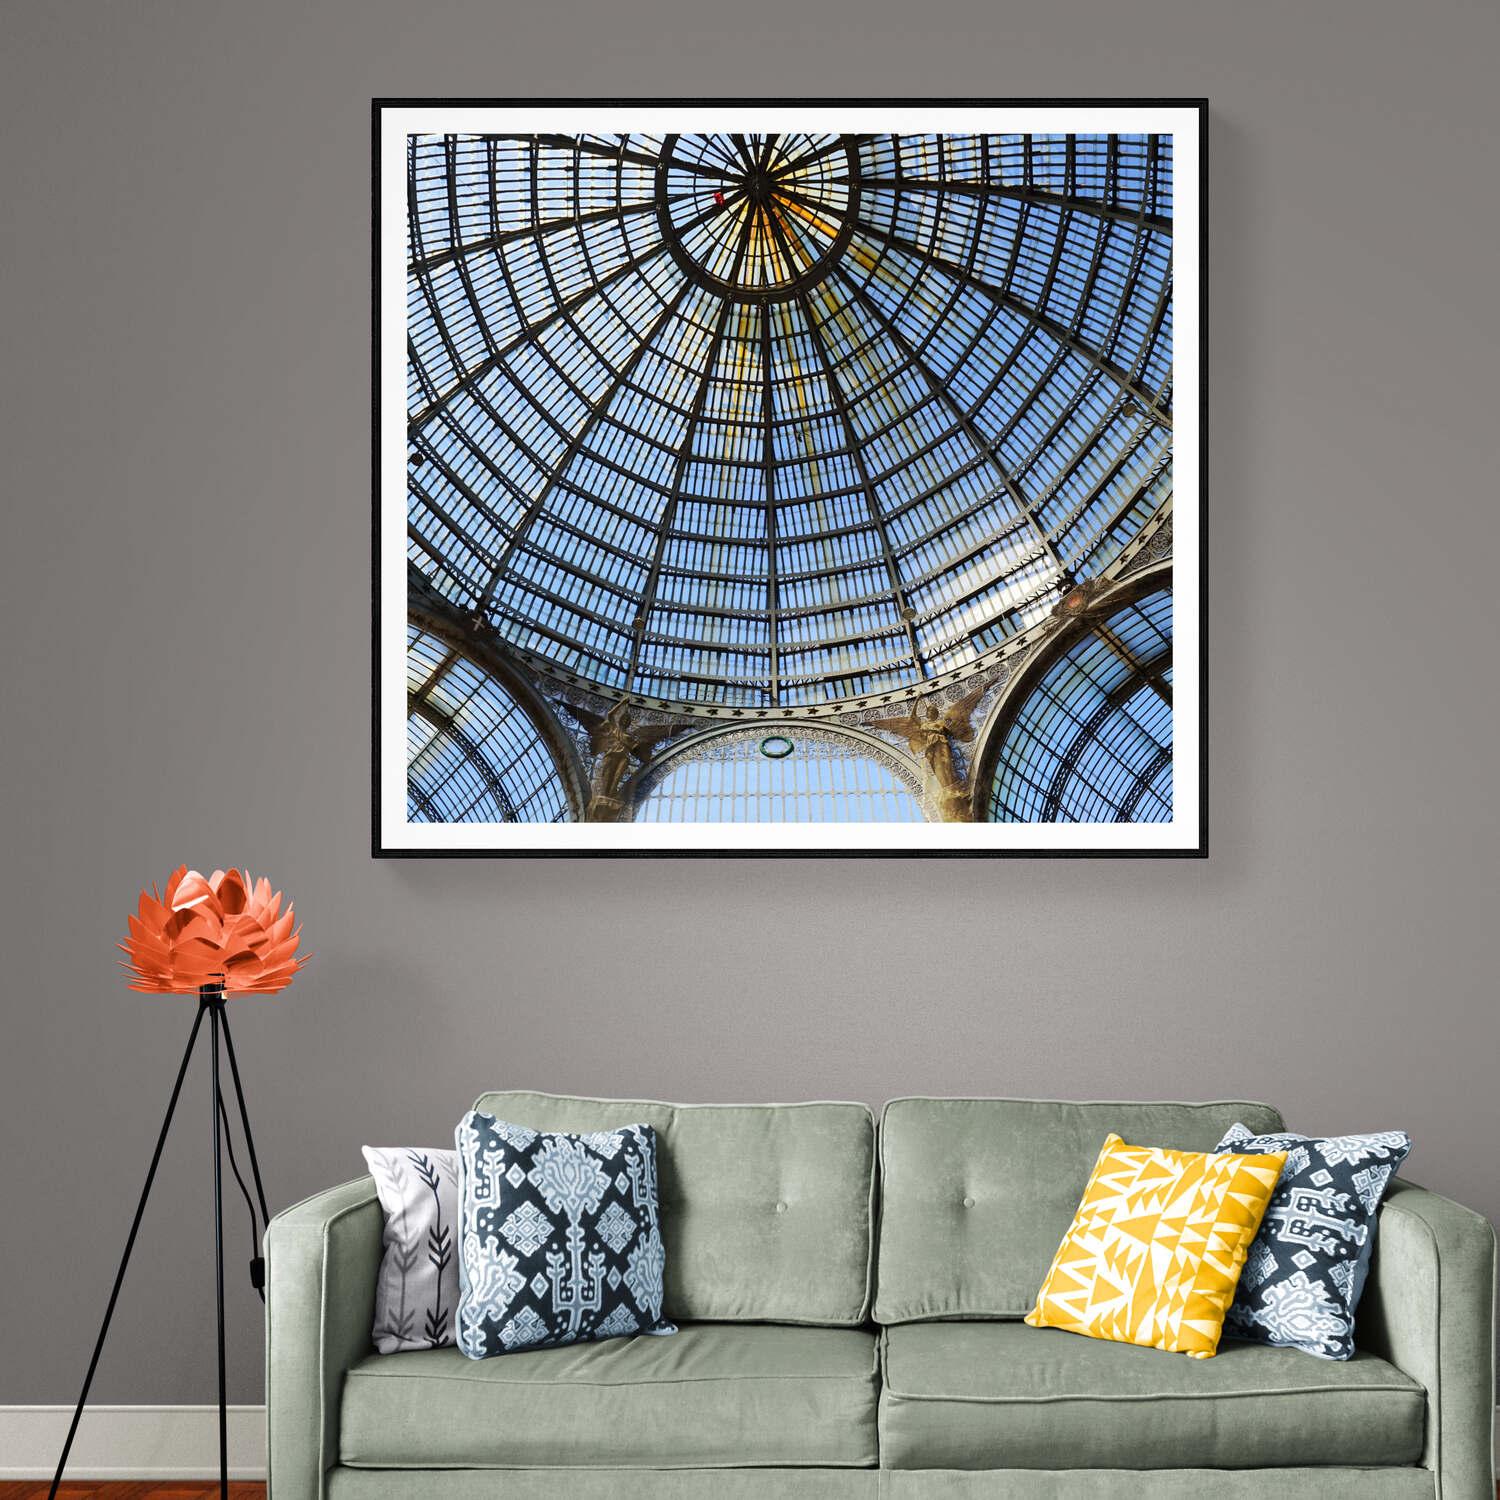 Galleria Umberto 1er of Napoly - Italy- Contemporary Panoramic Color Photography For Sale 2